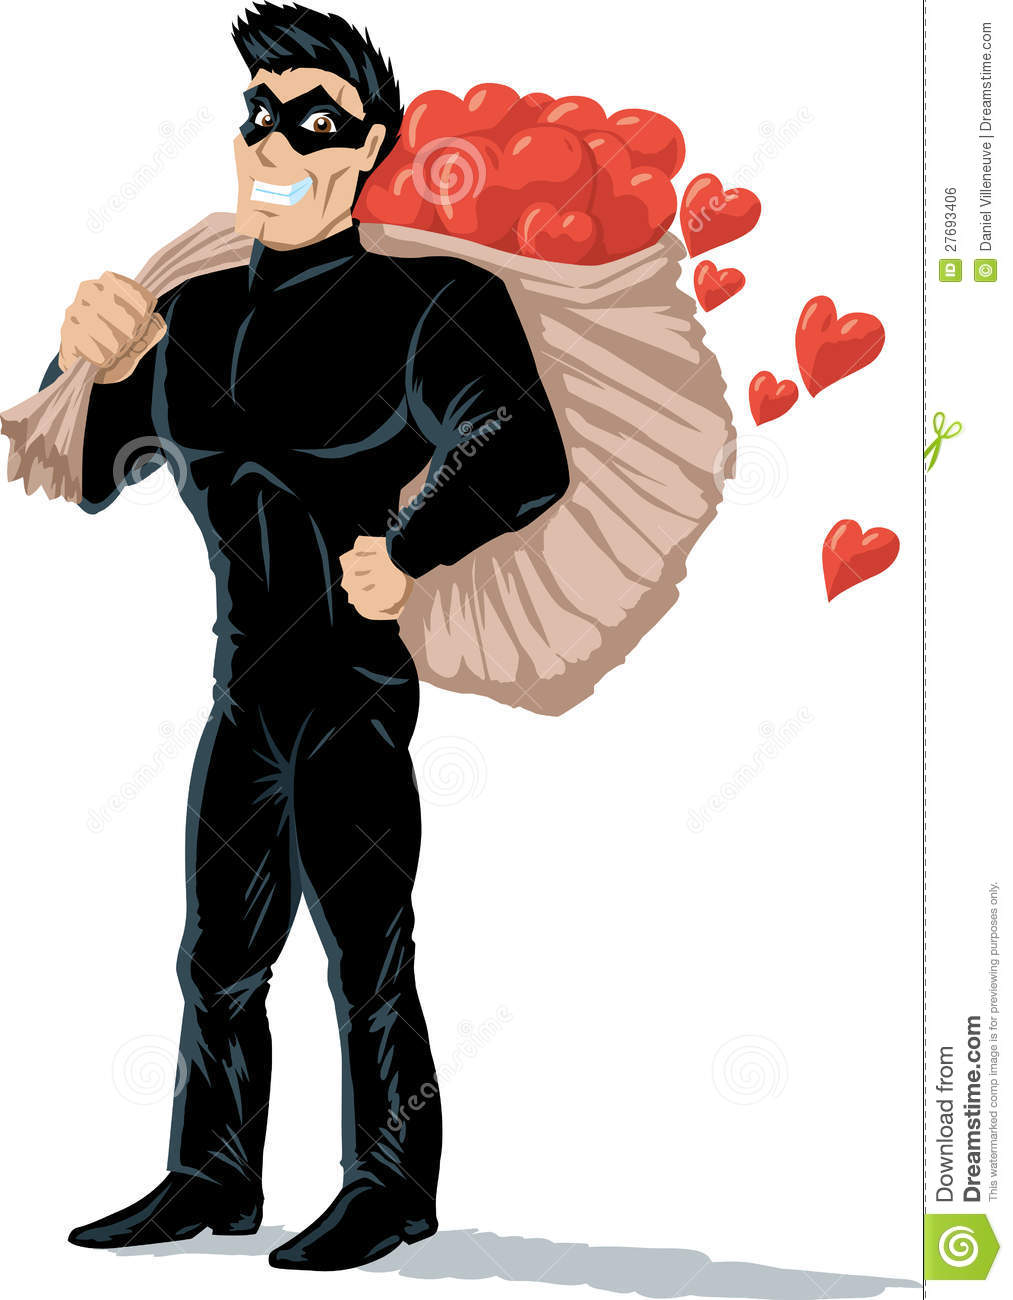 Thief Of Hearts Royalty Free Stock Image   Image  27693406